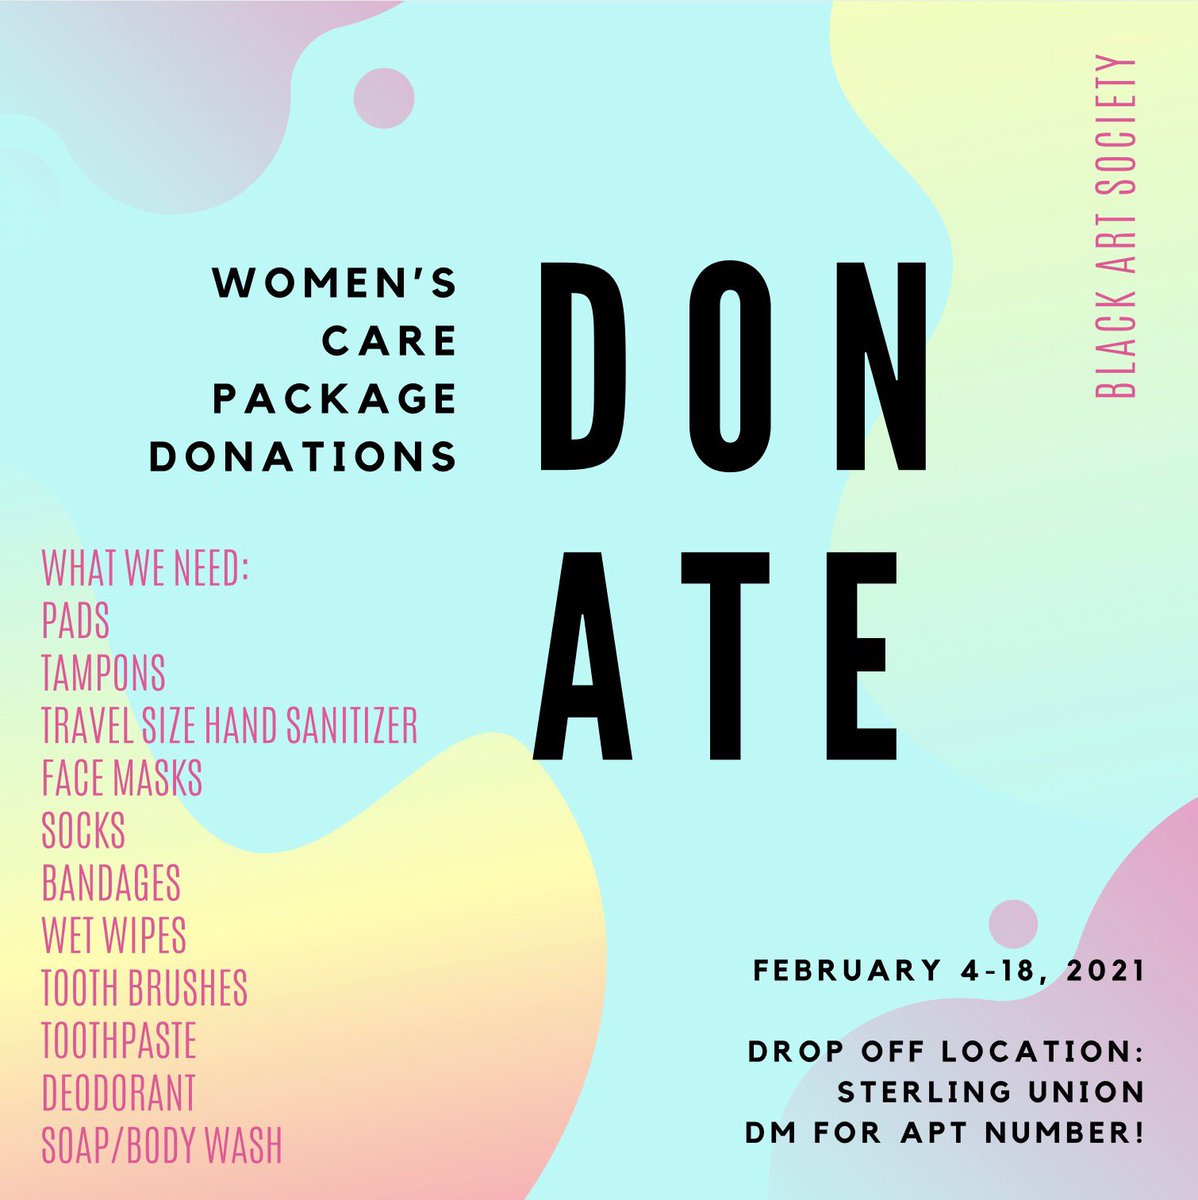 Starting today we will be accepting items for our hygiene care packages! Dm us for more information!@BlackArt_SHSU #shsu